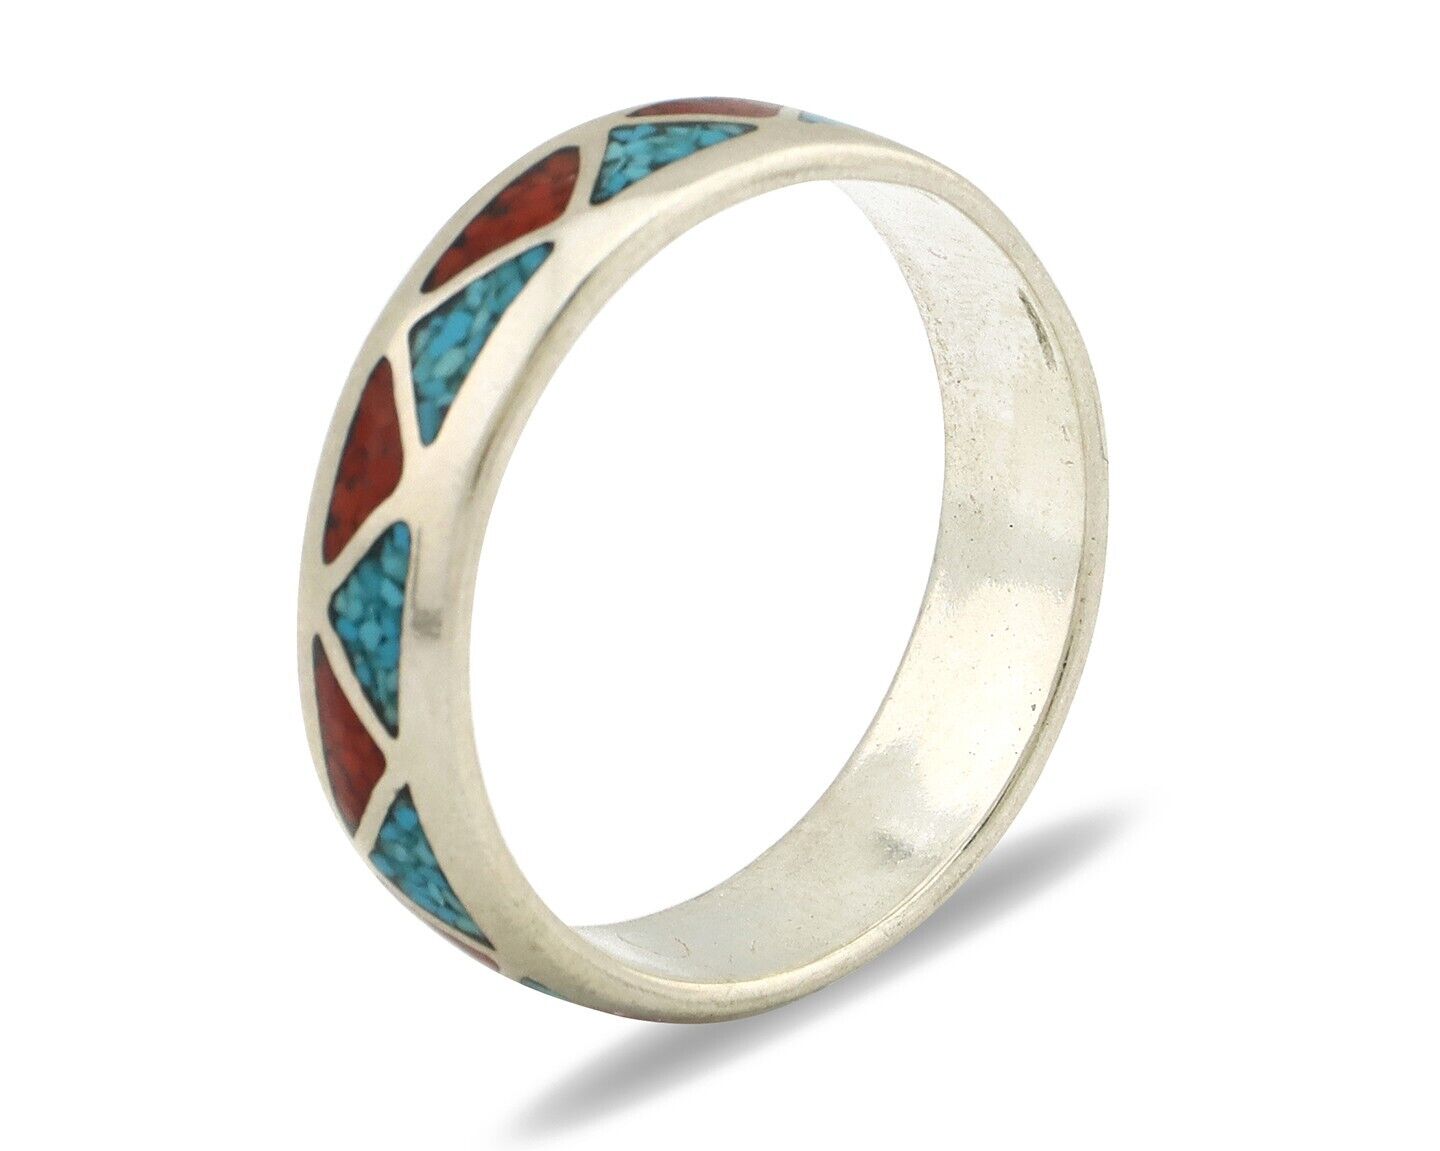 Navajo Chip Inlay Ring 925 Silver Sleeping Beauty Turquoise & Coral Silver Cloud